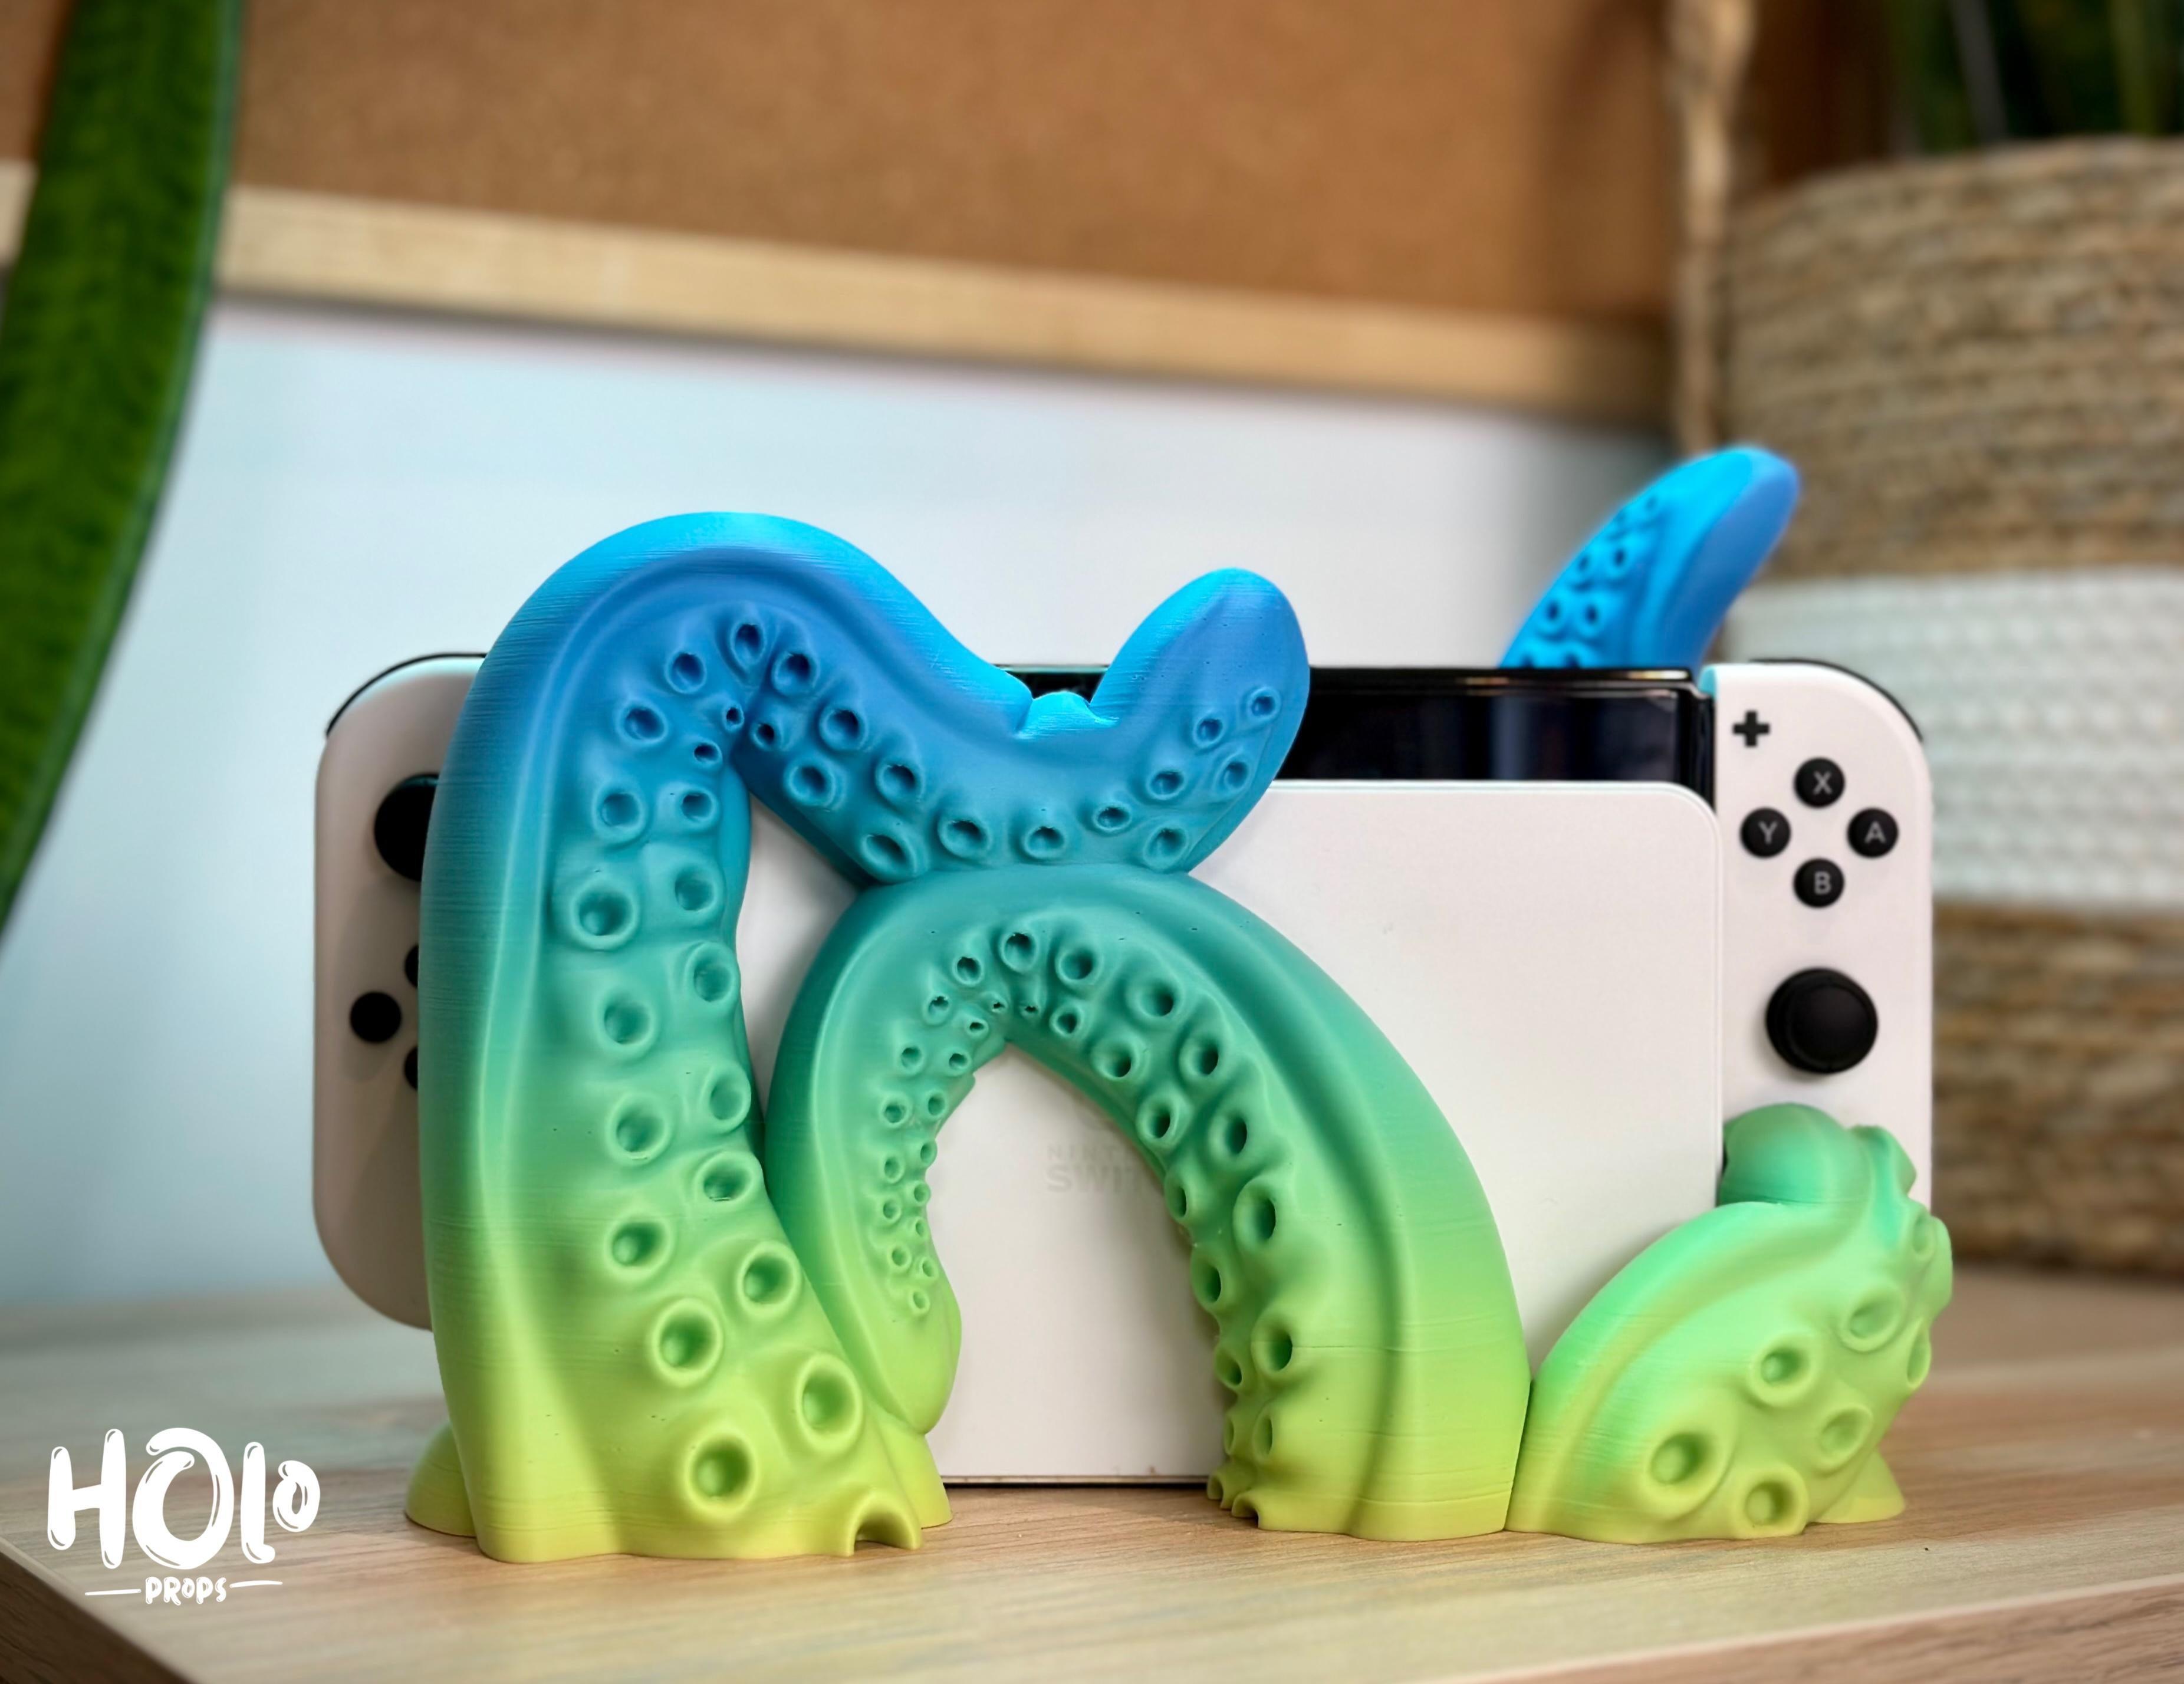 Nintendo Switch Tentacle Dock - Classic & OLED version 3d model